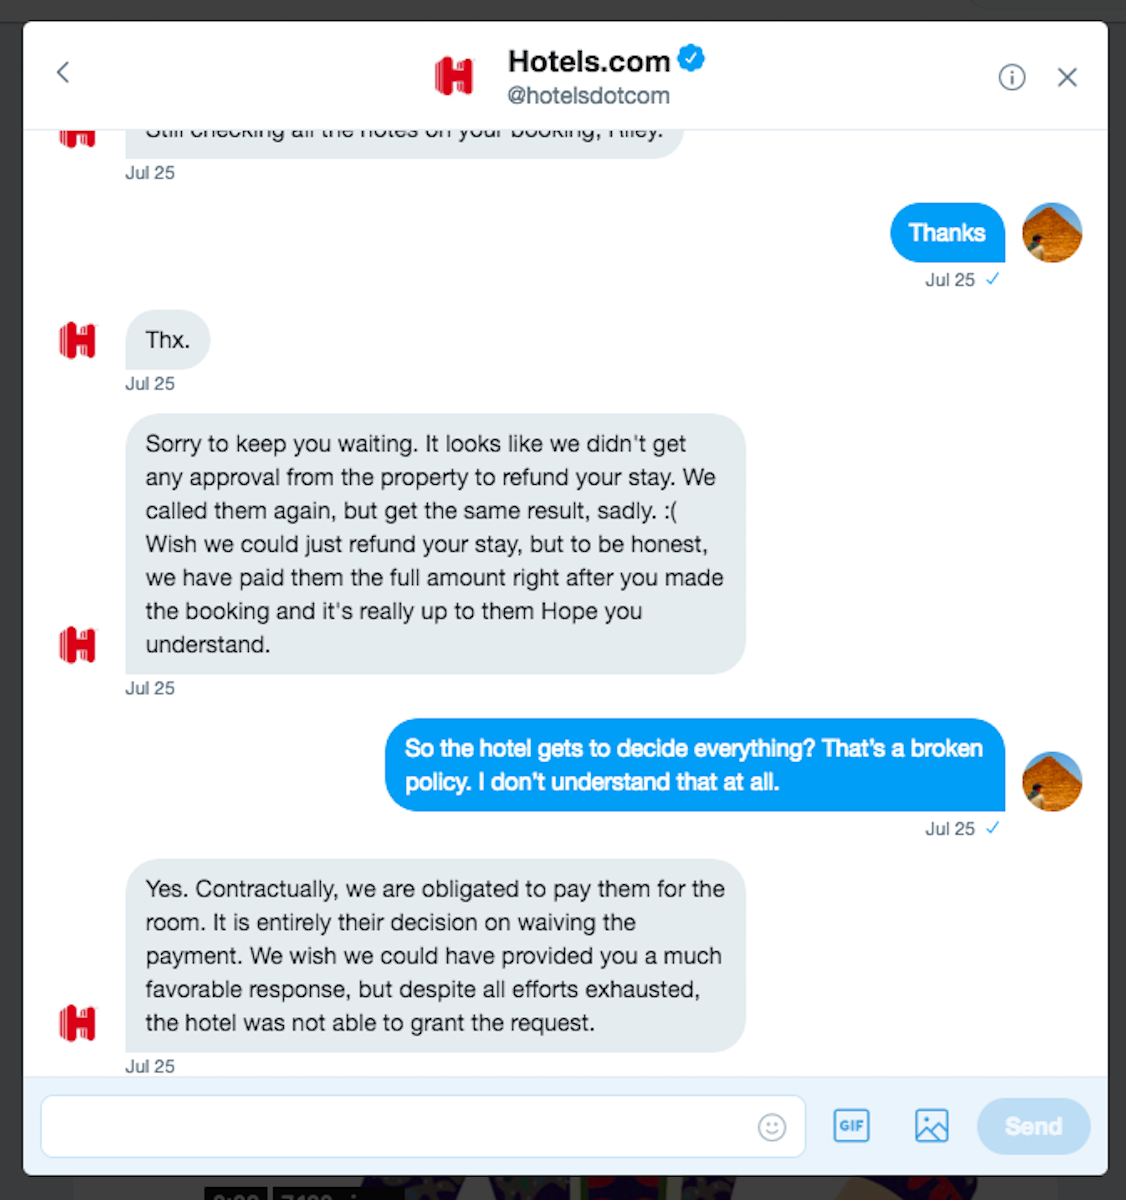 Hotels.com cancelation policy on twitter